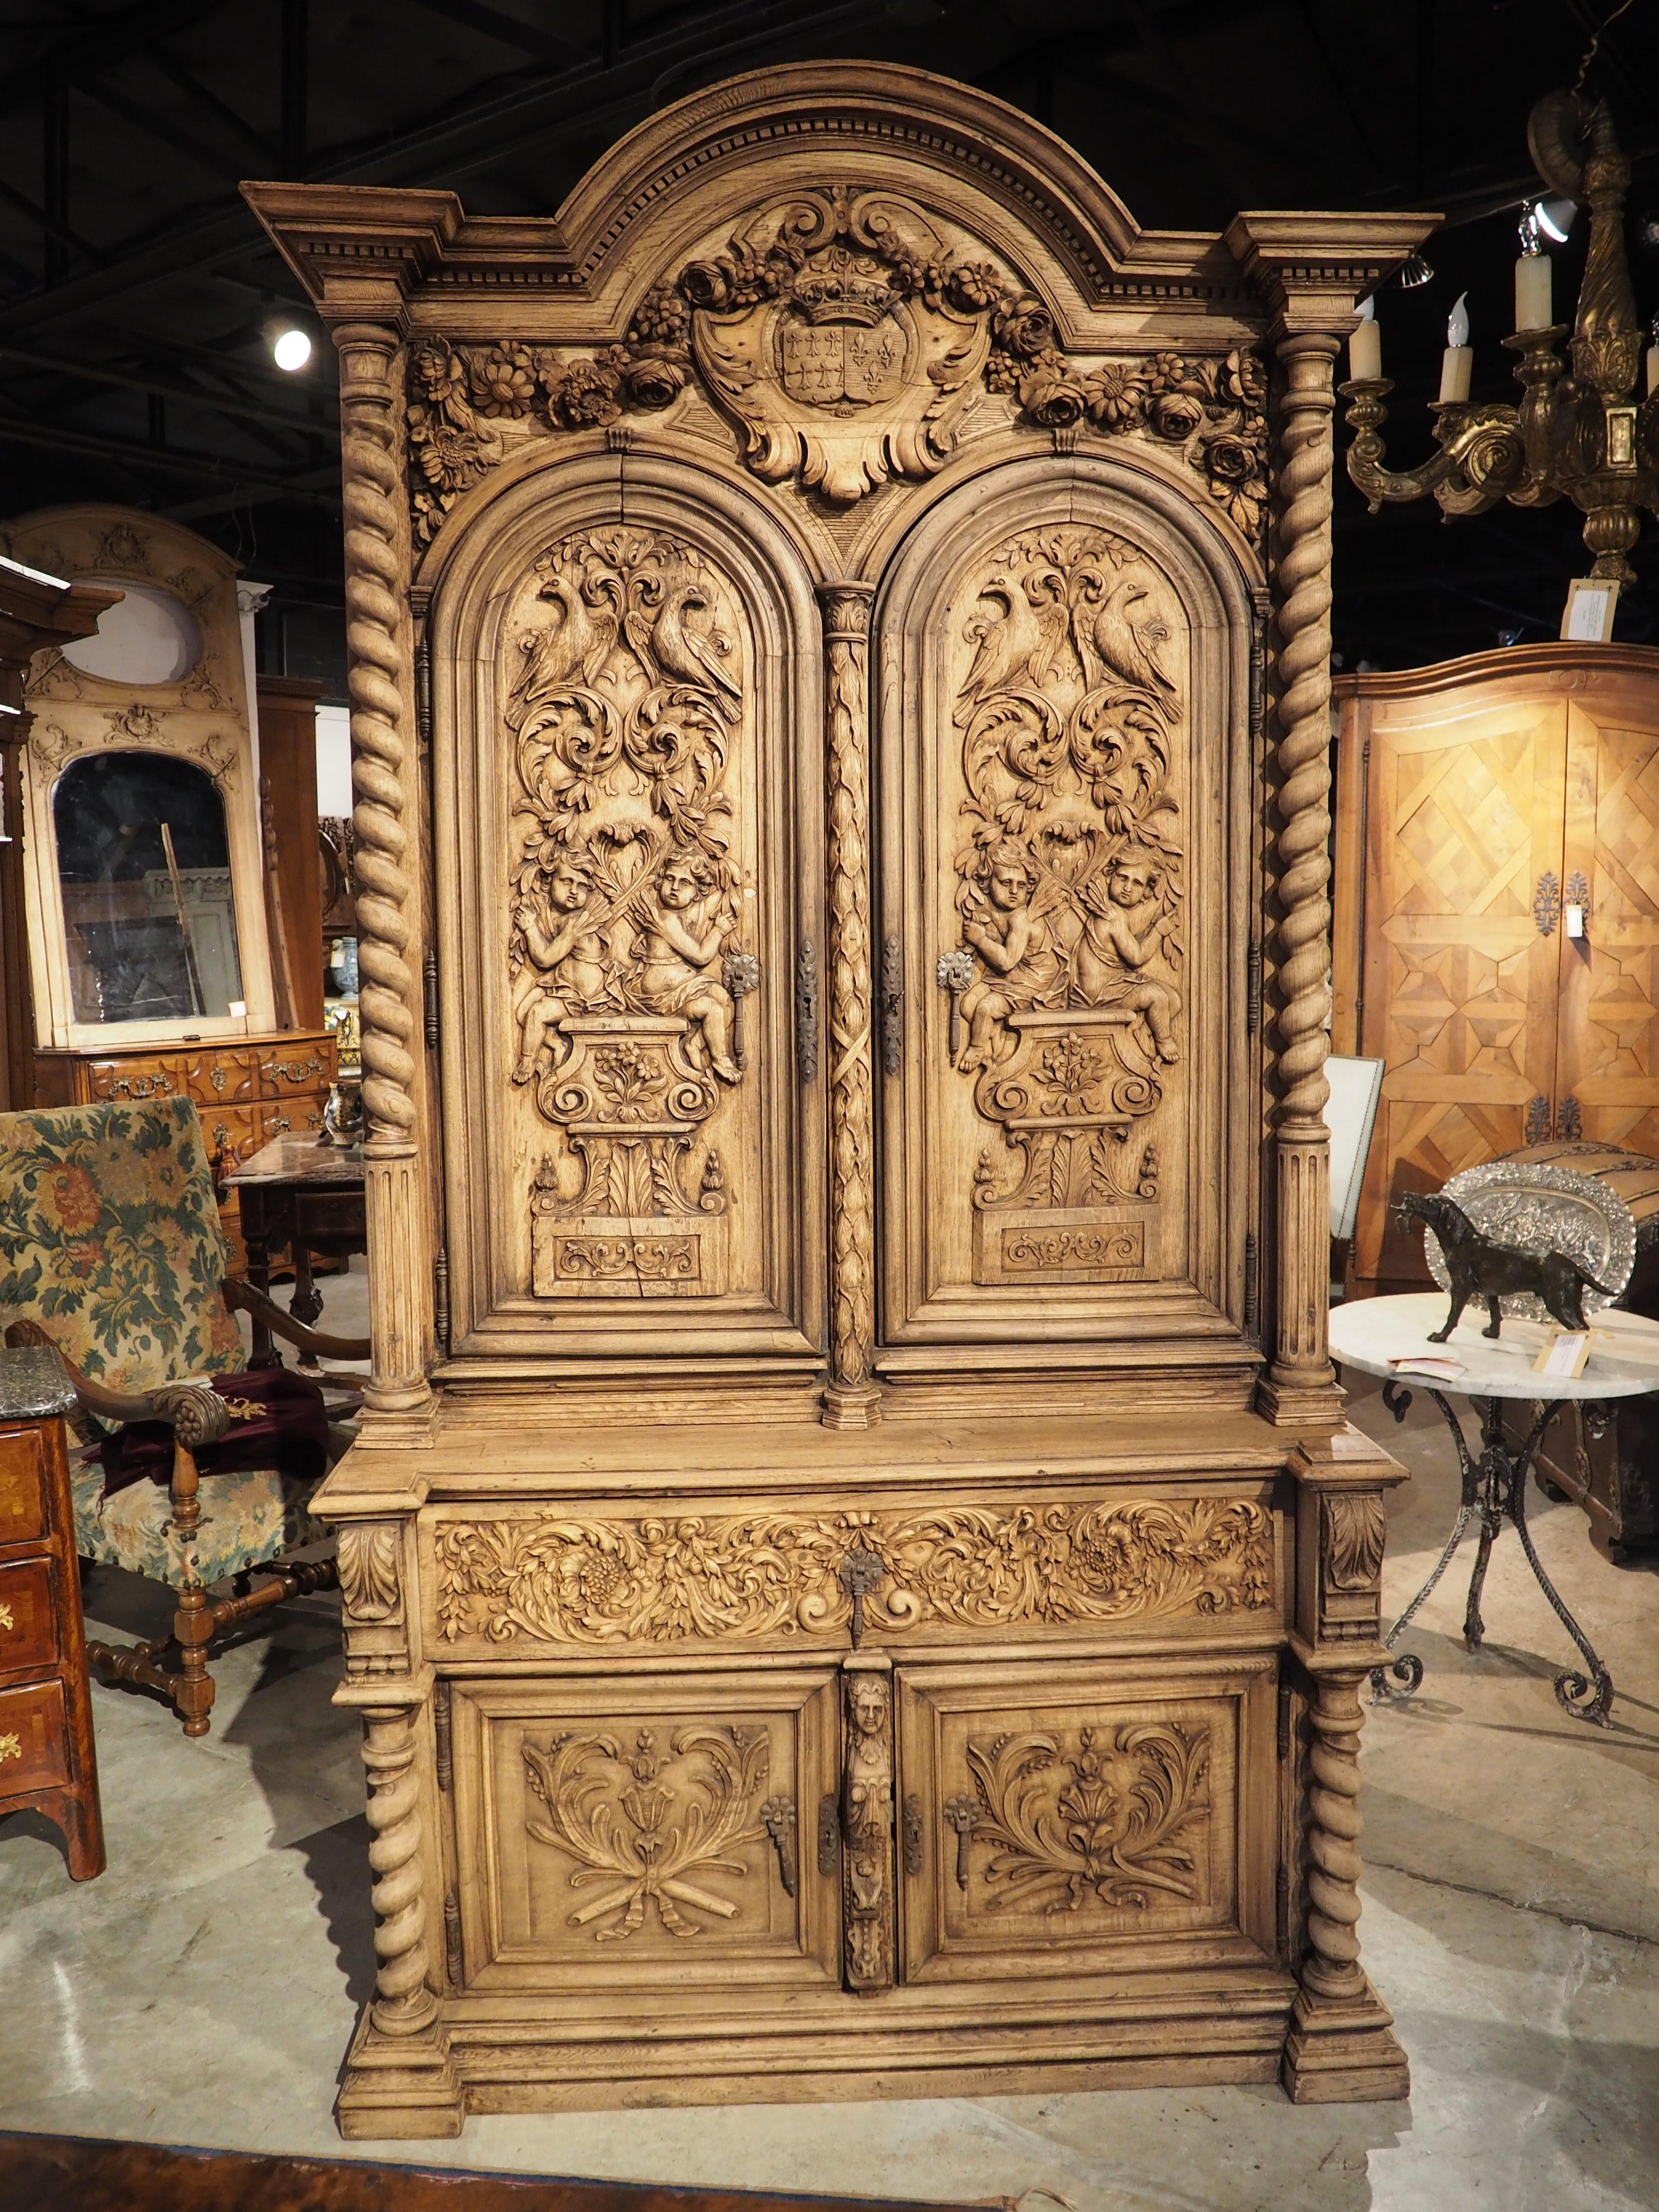 An unbelievably detailed oak buffet deux-corps that was hand-carved in France in the 1800’s, this piece features the Arms of Brittany and France. The original finish was recently stripped, giving the beautiful wood grain more prominence and